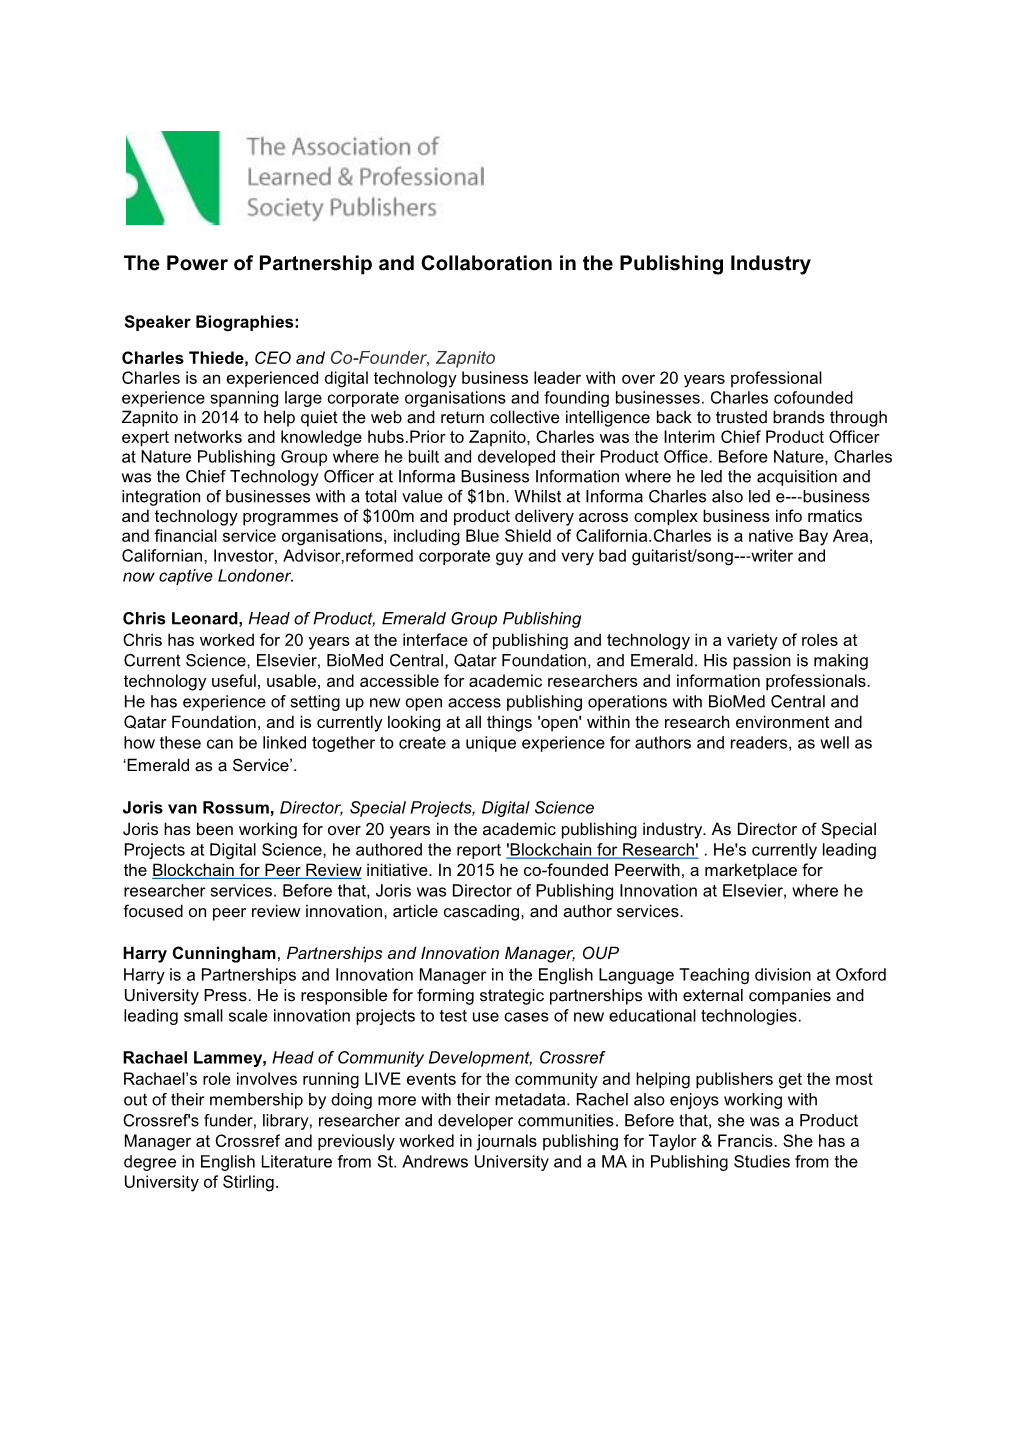 The Power of Partnership and Collaboration in the Publishing Industry